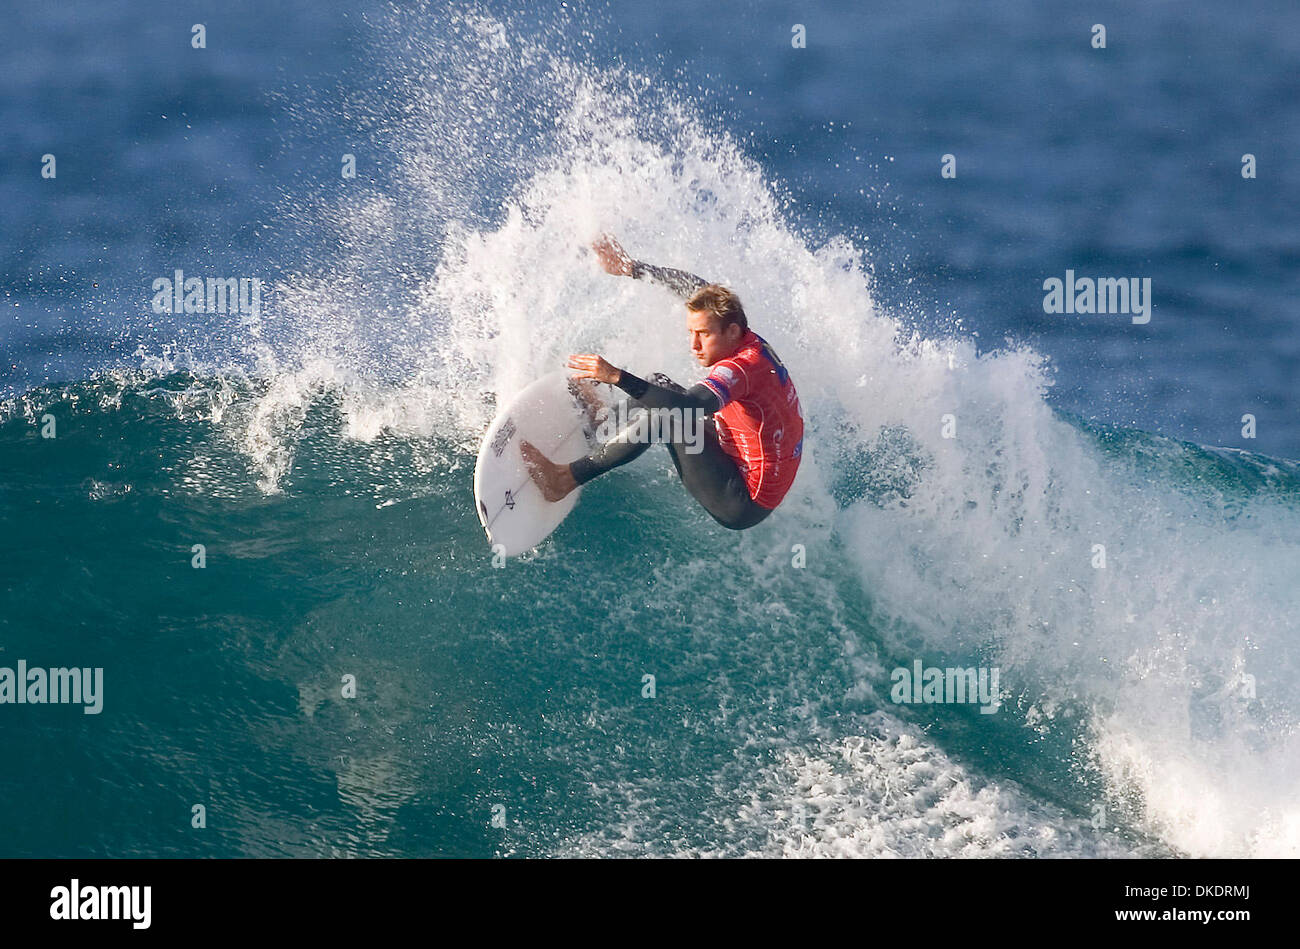 Apr 12, 2007 - Bells Beach, Victoria, Australia - TOM WHITAKER (Aus/Bronte/Sydney) defeated Leonaro Neves (Bra) and will shortly face Kelly Slater in the quarter finals. TheÊ35th annual Rip CurlÊProÊis theÊsecondÊevent on the 2007 FostersÊASPÊMenÕsÊWorld Tour and features the top 45 surfers in world and three wild card surfers with US$ 300,000.00 in prize money. Included in the wor Stock Photo